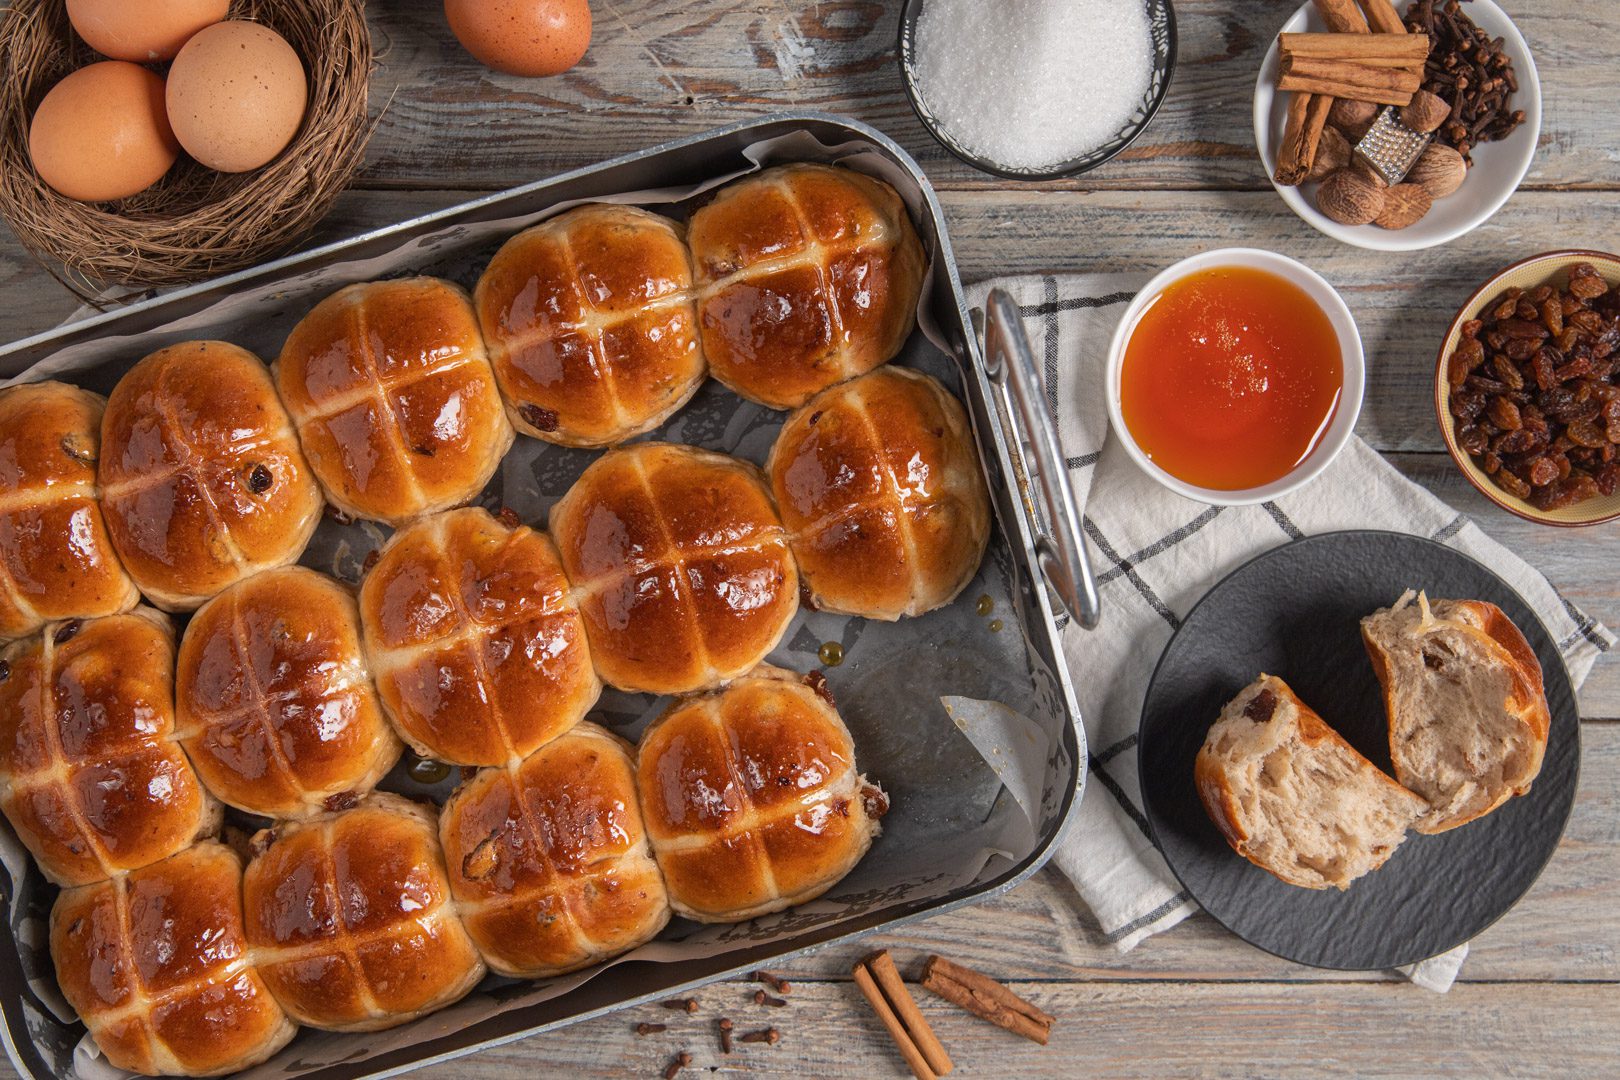 Hot cross buns - Dolce tipico inglese